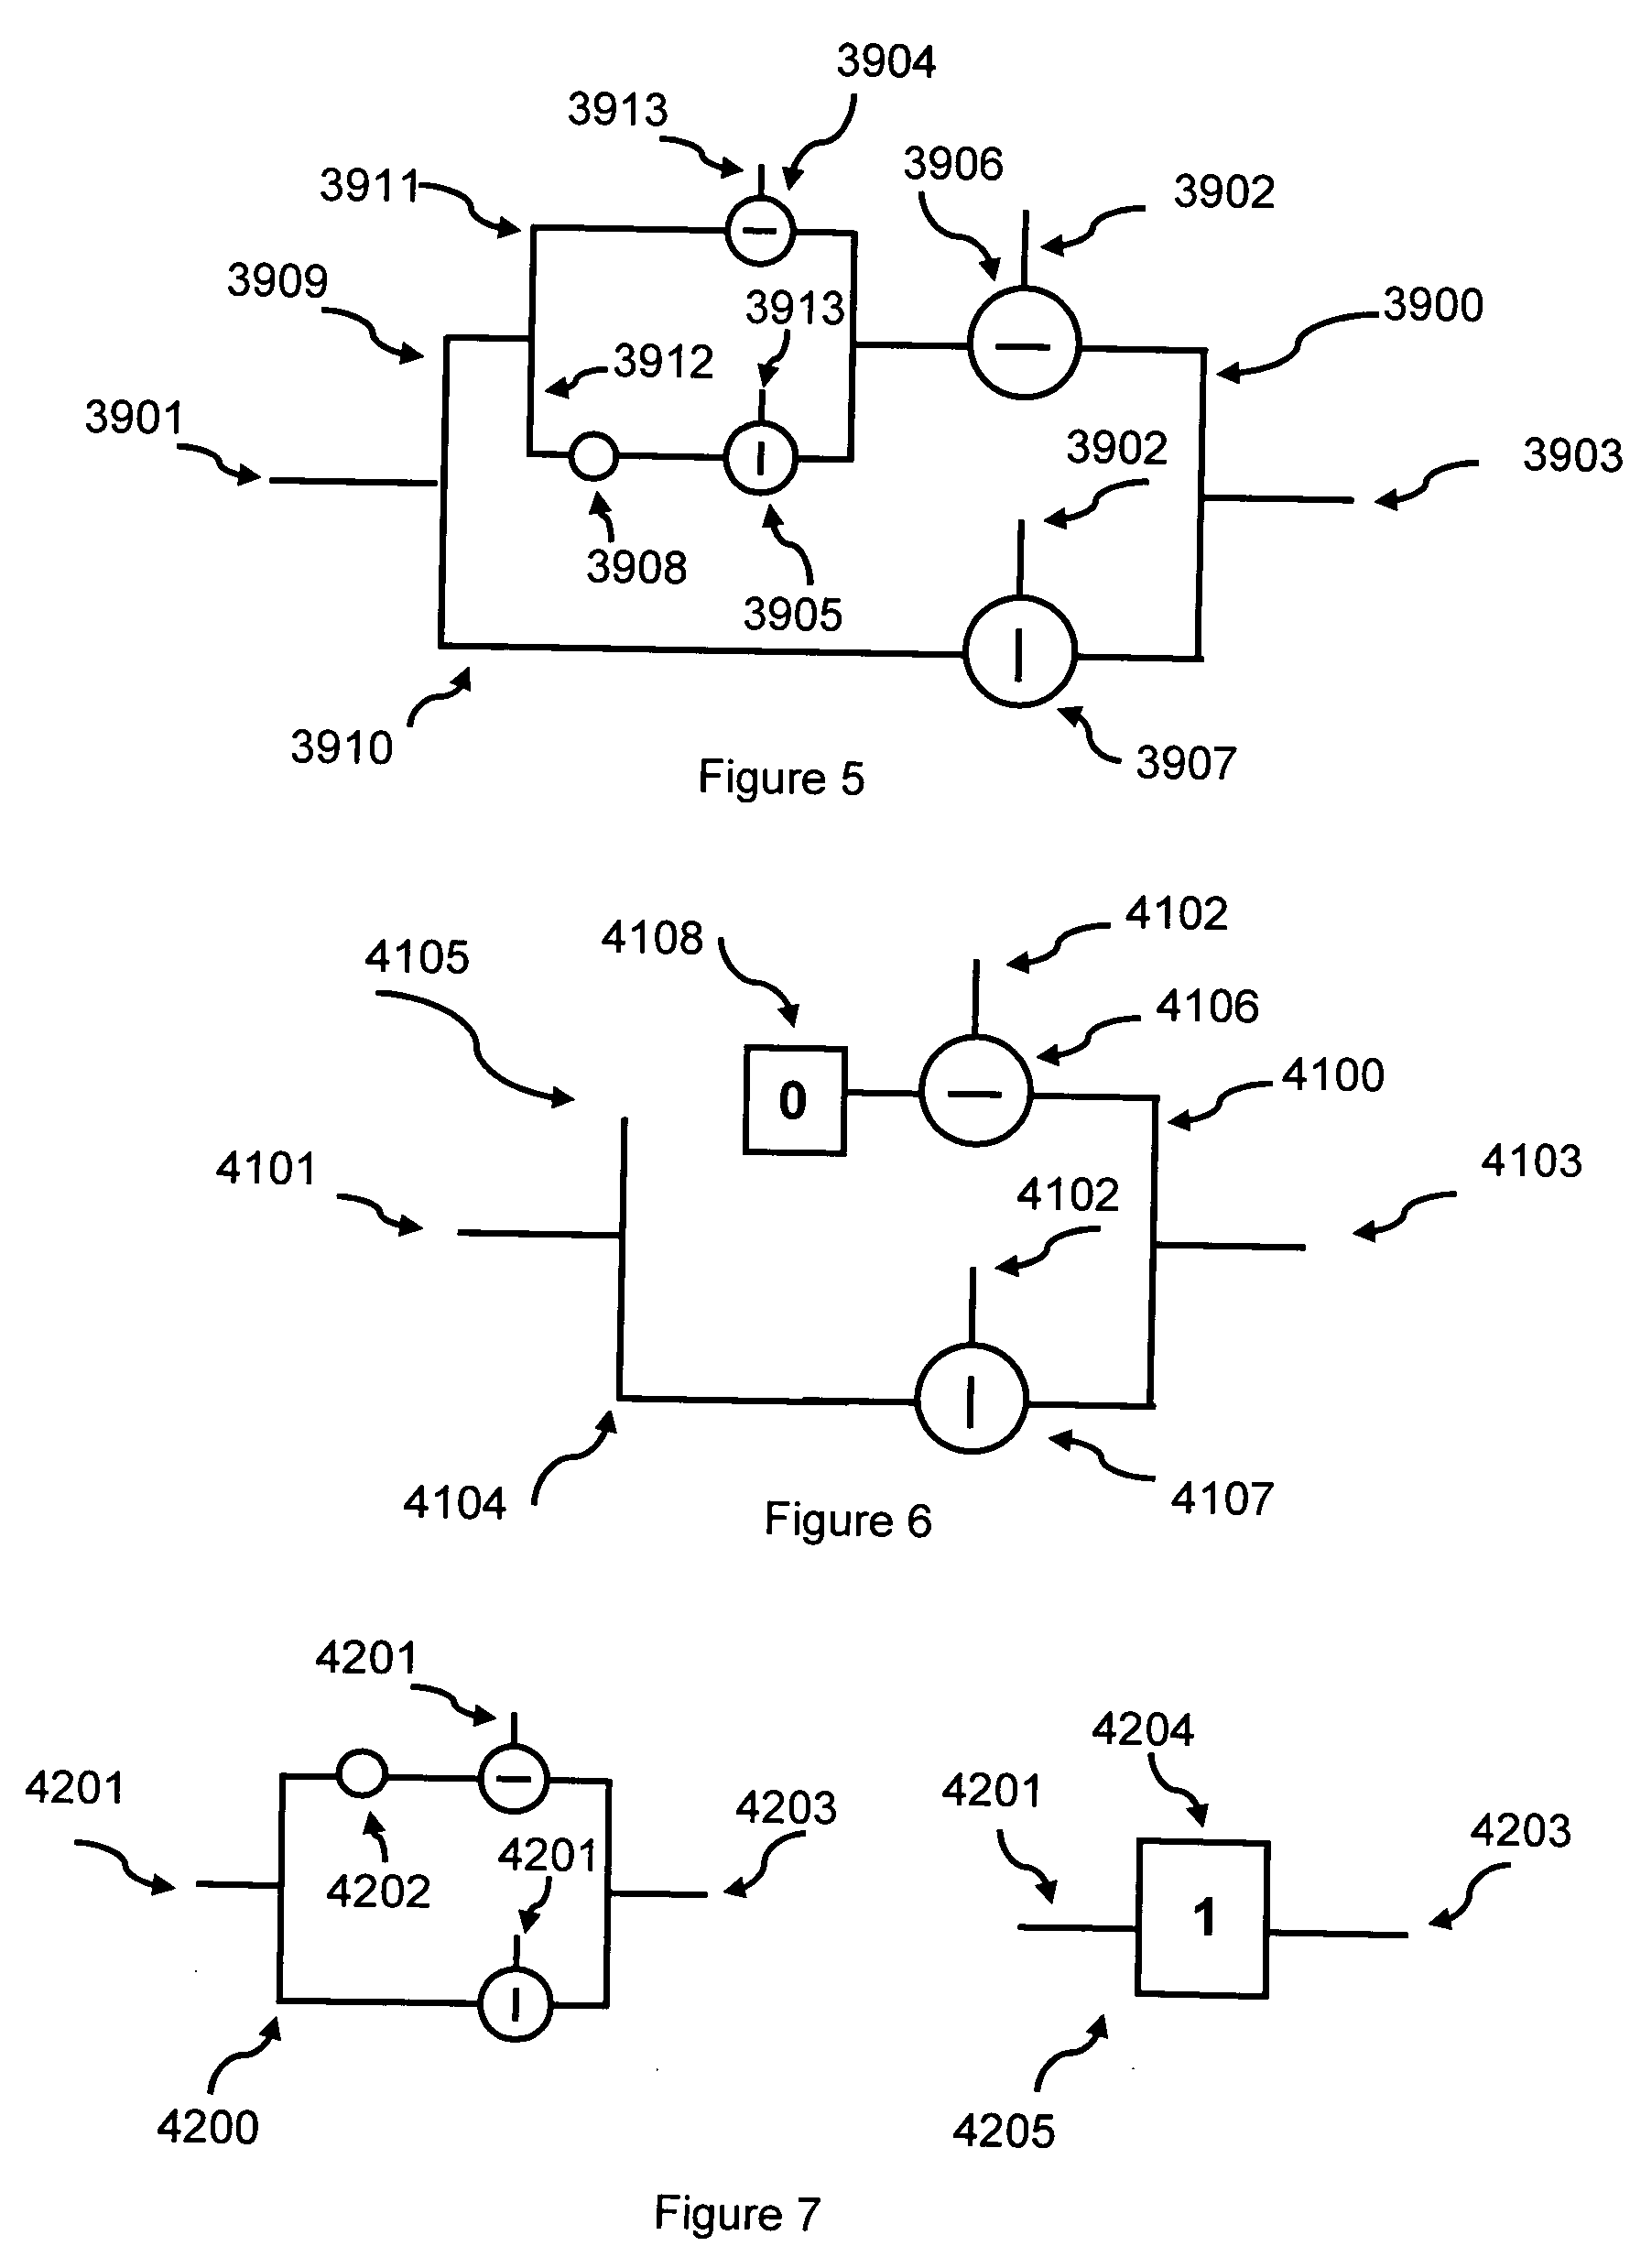 Single and composite binary and multi-valued logic functions from gates and inverters